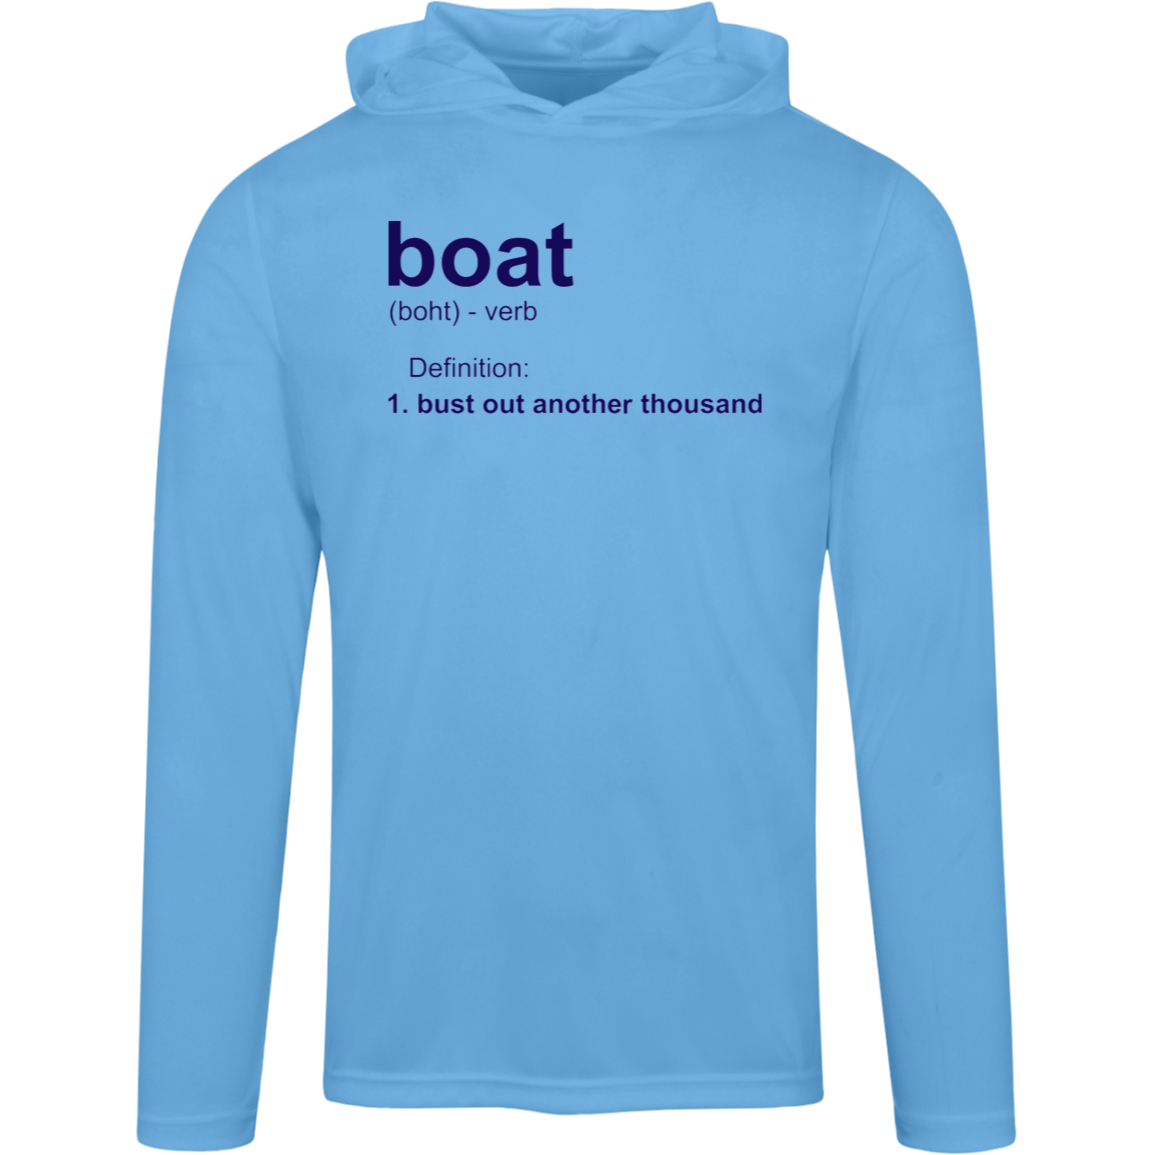 ***2 SIDED***  HRCL FL - Navy Boat.... Bust Out Another Thousand - TT41 Team 365 Mens Zone Hooded Tee